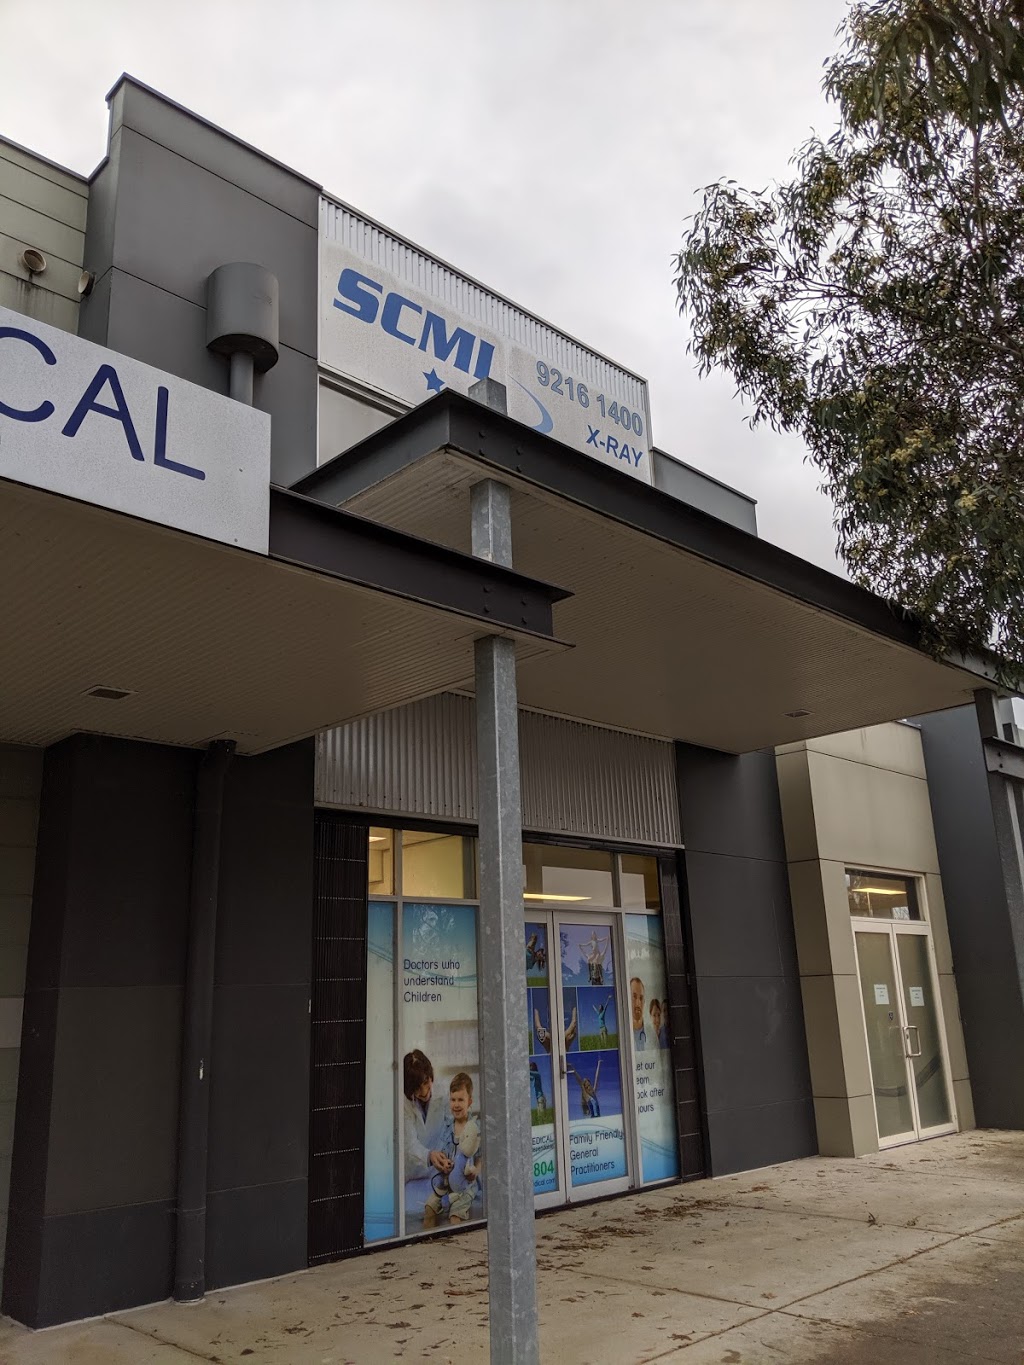 Southern Cross Medical Imaging | doctor | Laurimar Specialist Centre, 120-122 Painted Hills Road, Doreen VIC 3754, Australia | 0392161400 OR +61 3 9216 1400